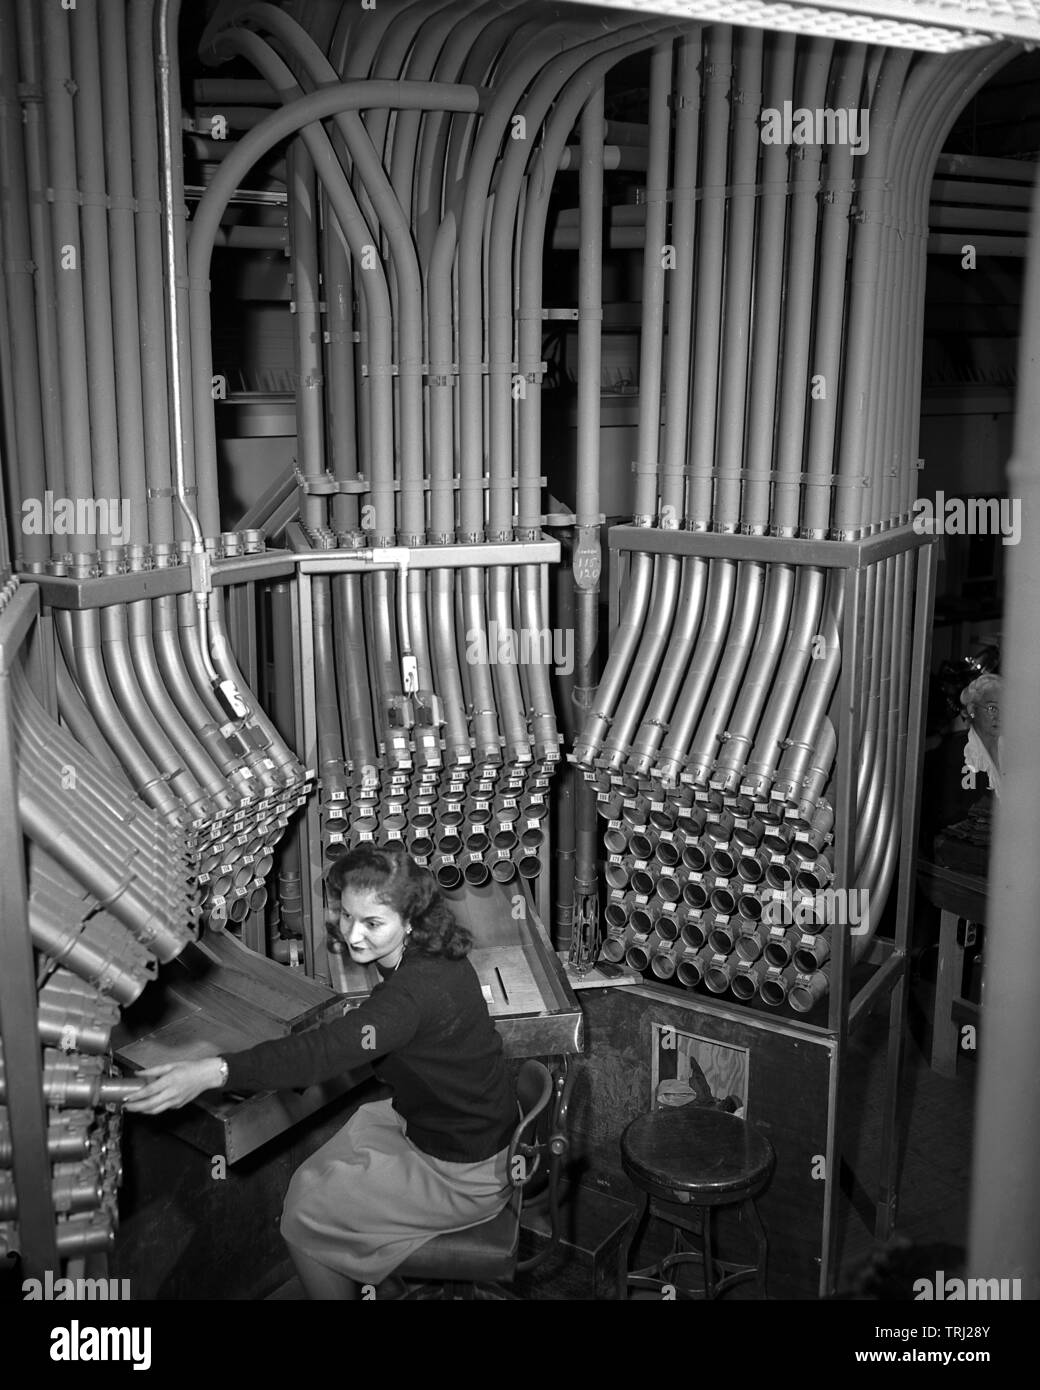 The Pneumatic Tube Room at department store Marshal Fields in Chicago, IL. Tubes whisks transaction in 90 seconds, 1947. Stock Photo